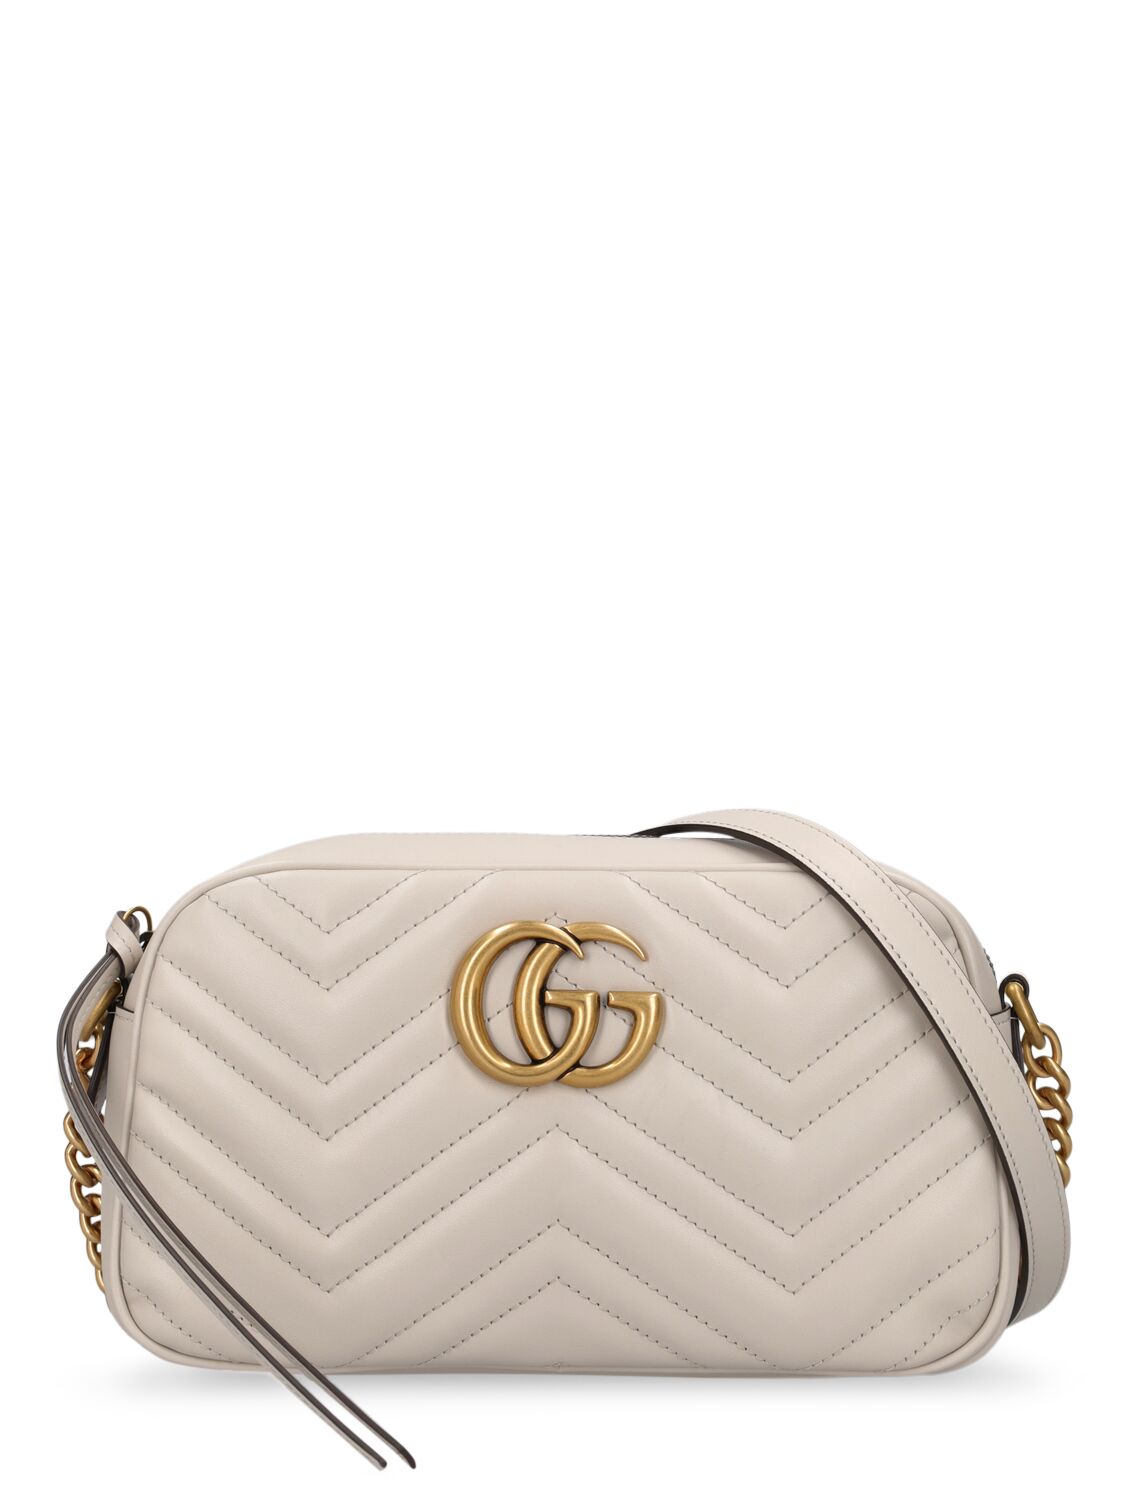 Gucci Gg Marmont Leather Shoulder Bag In White